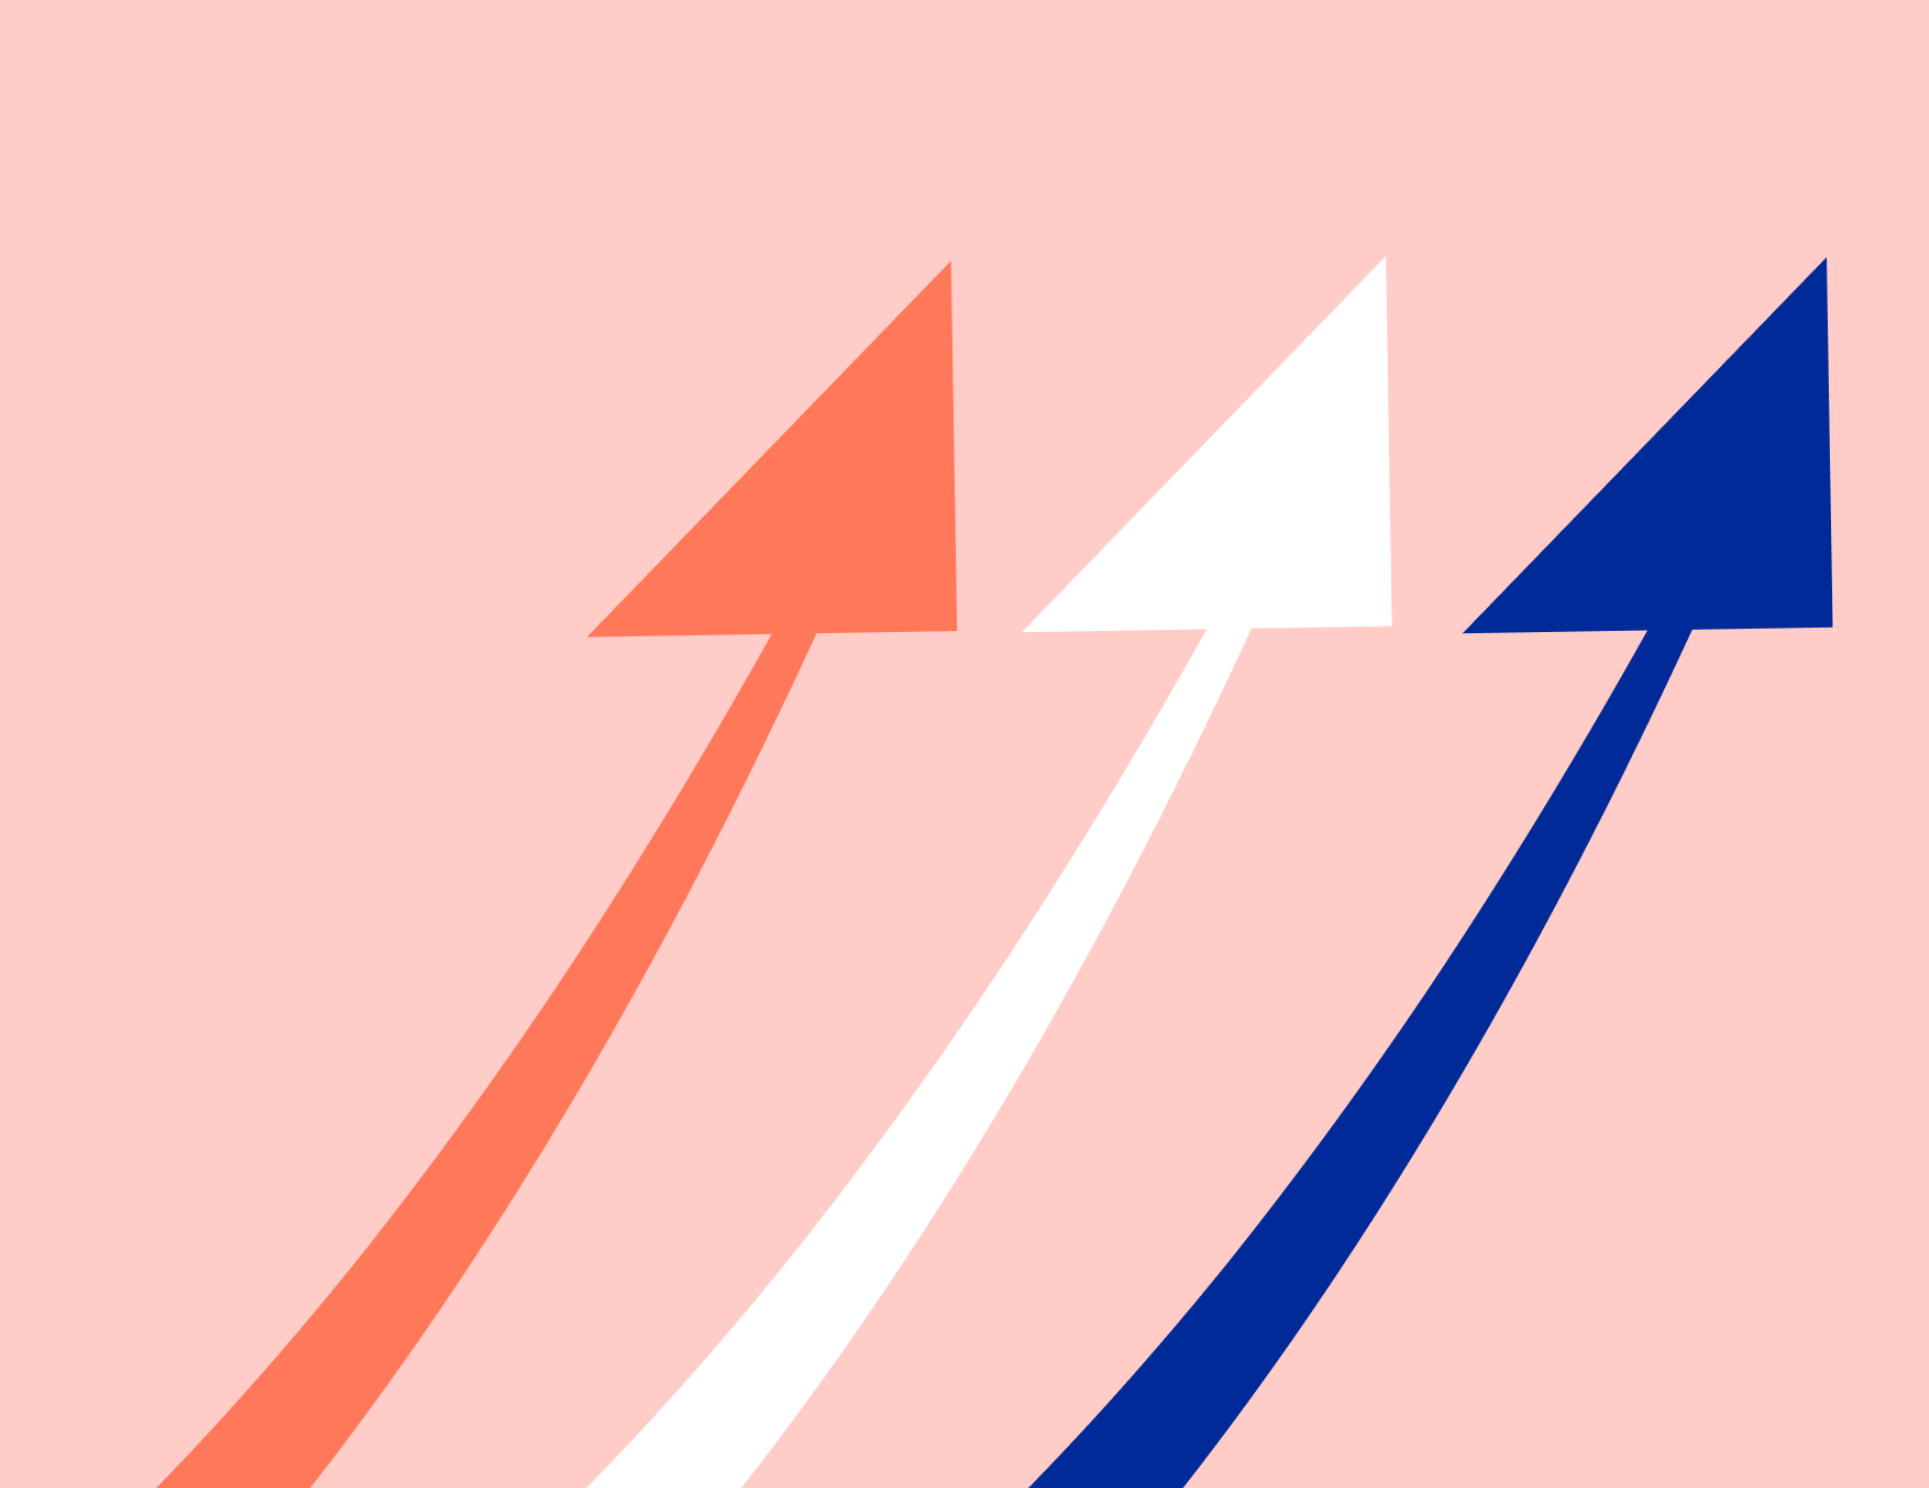 image of orange, white and blue arrows on a pink background